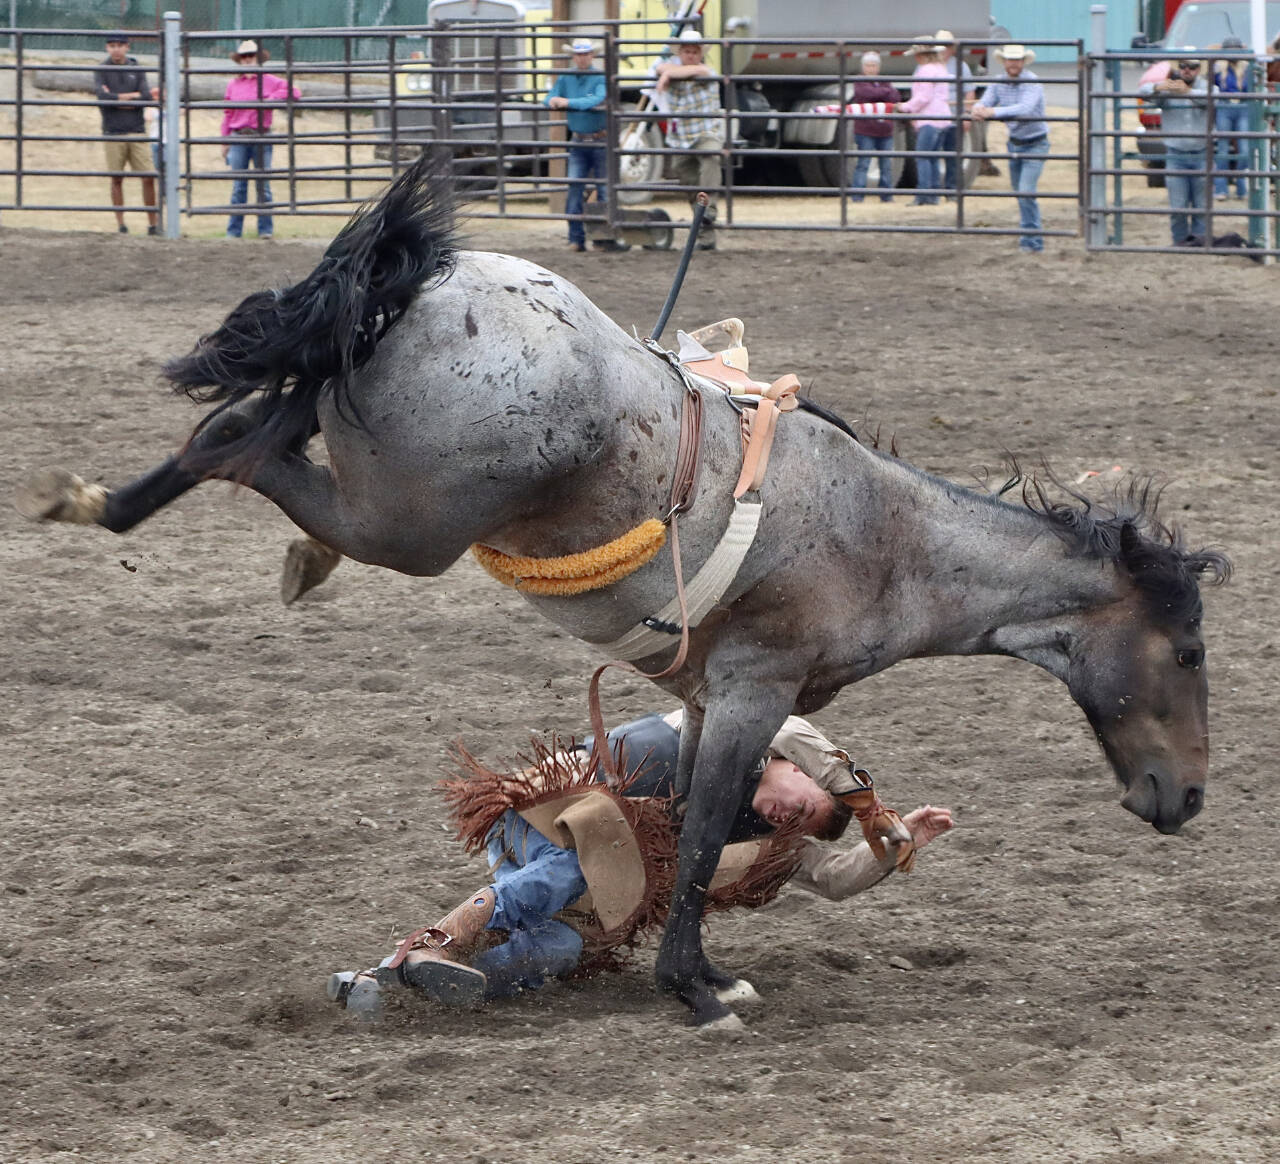 Carson Holt, age 20, of Sequim, falls off his horse in the bareback riding competition at the Clallam County Fair rodeo Sunday. He only lasted five seconds, short of the required eight seconds to win $600. (Dave Logan/for Peninsula Daily News)